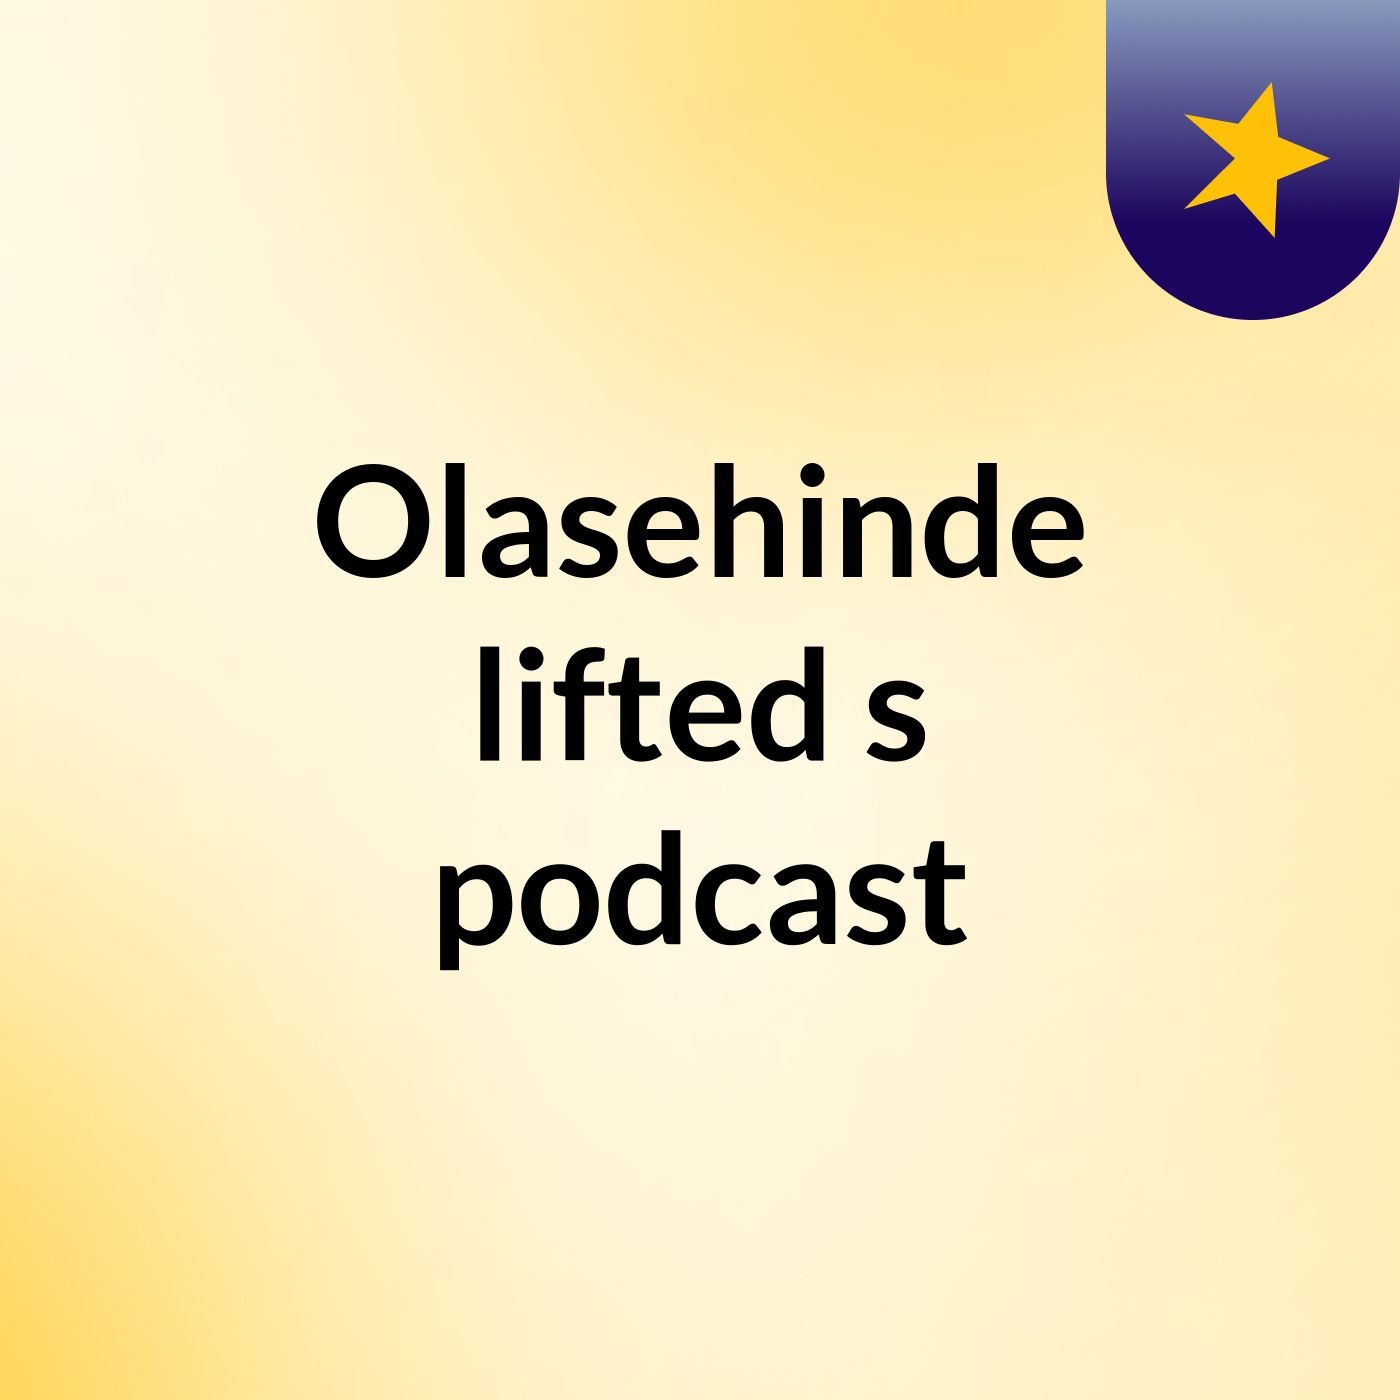 Olasehinde lifted's podcast